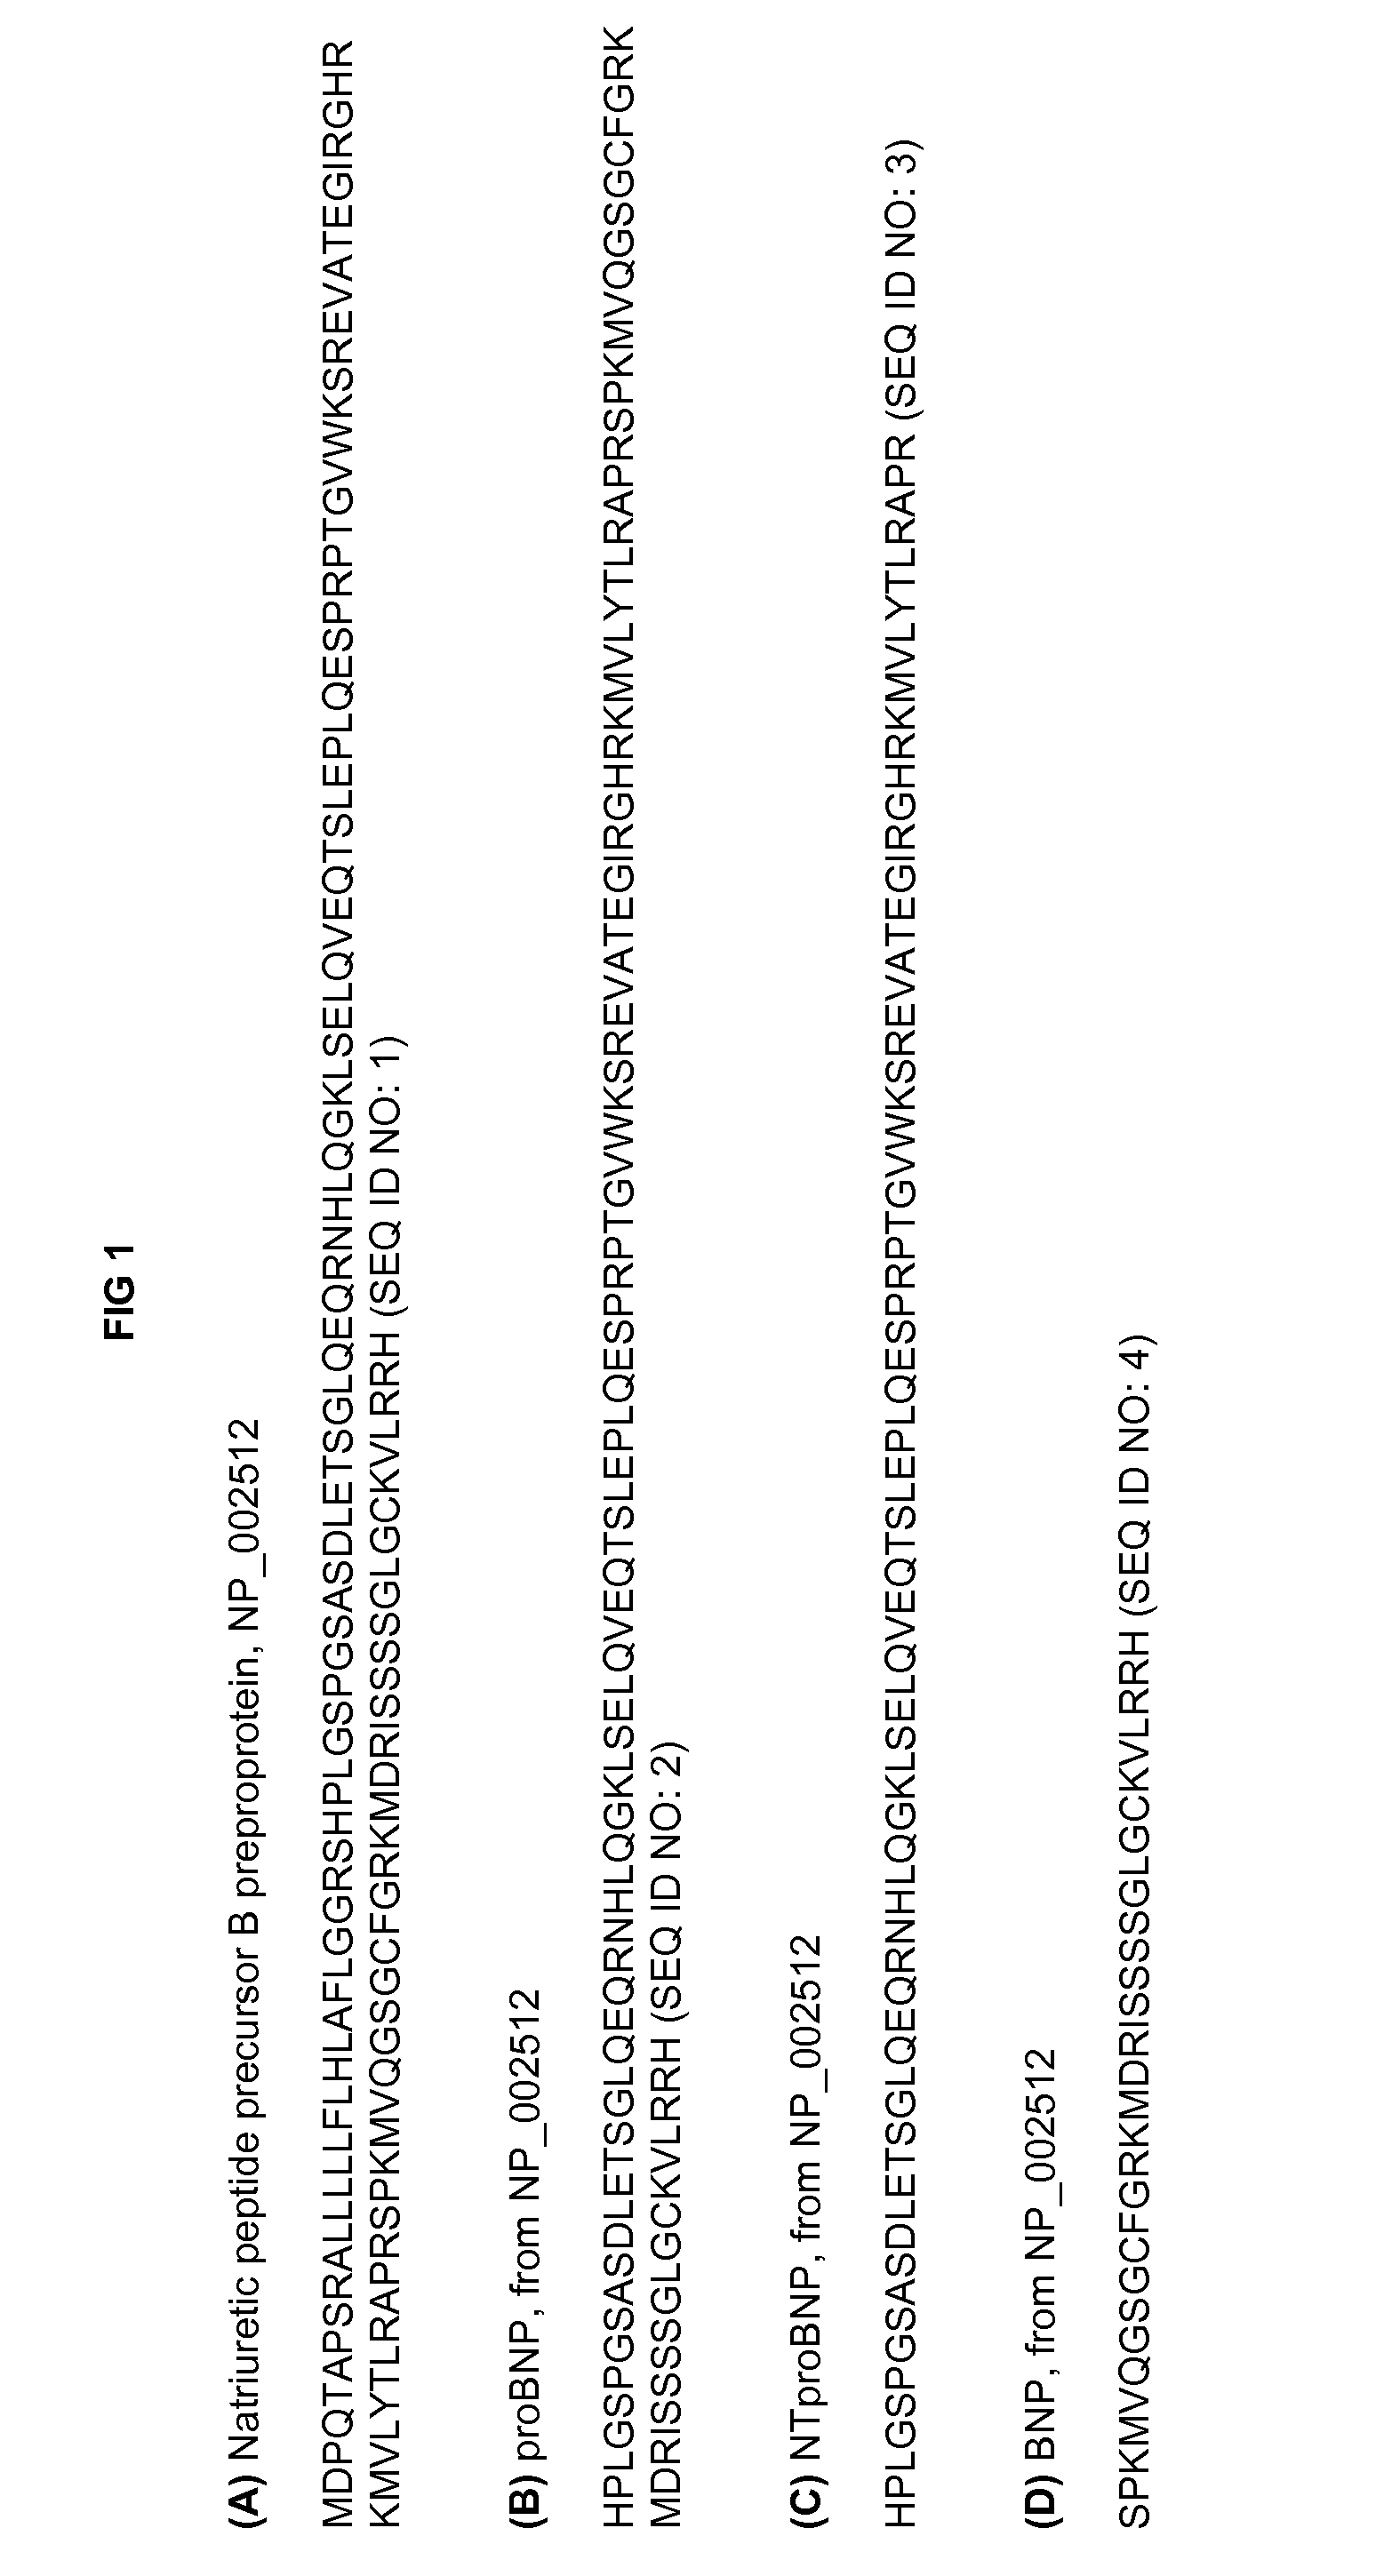 Novel polypeptides related to b-type natriuretic peptides and methods of their identification and use